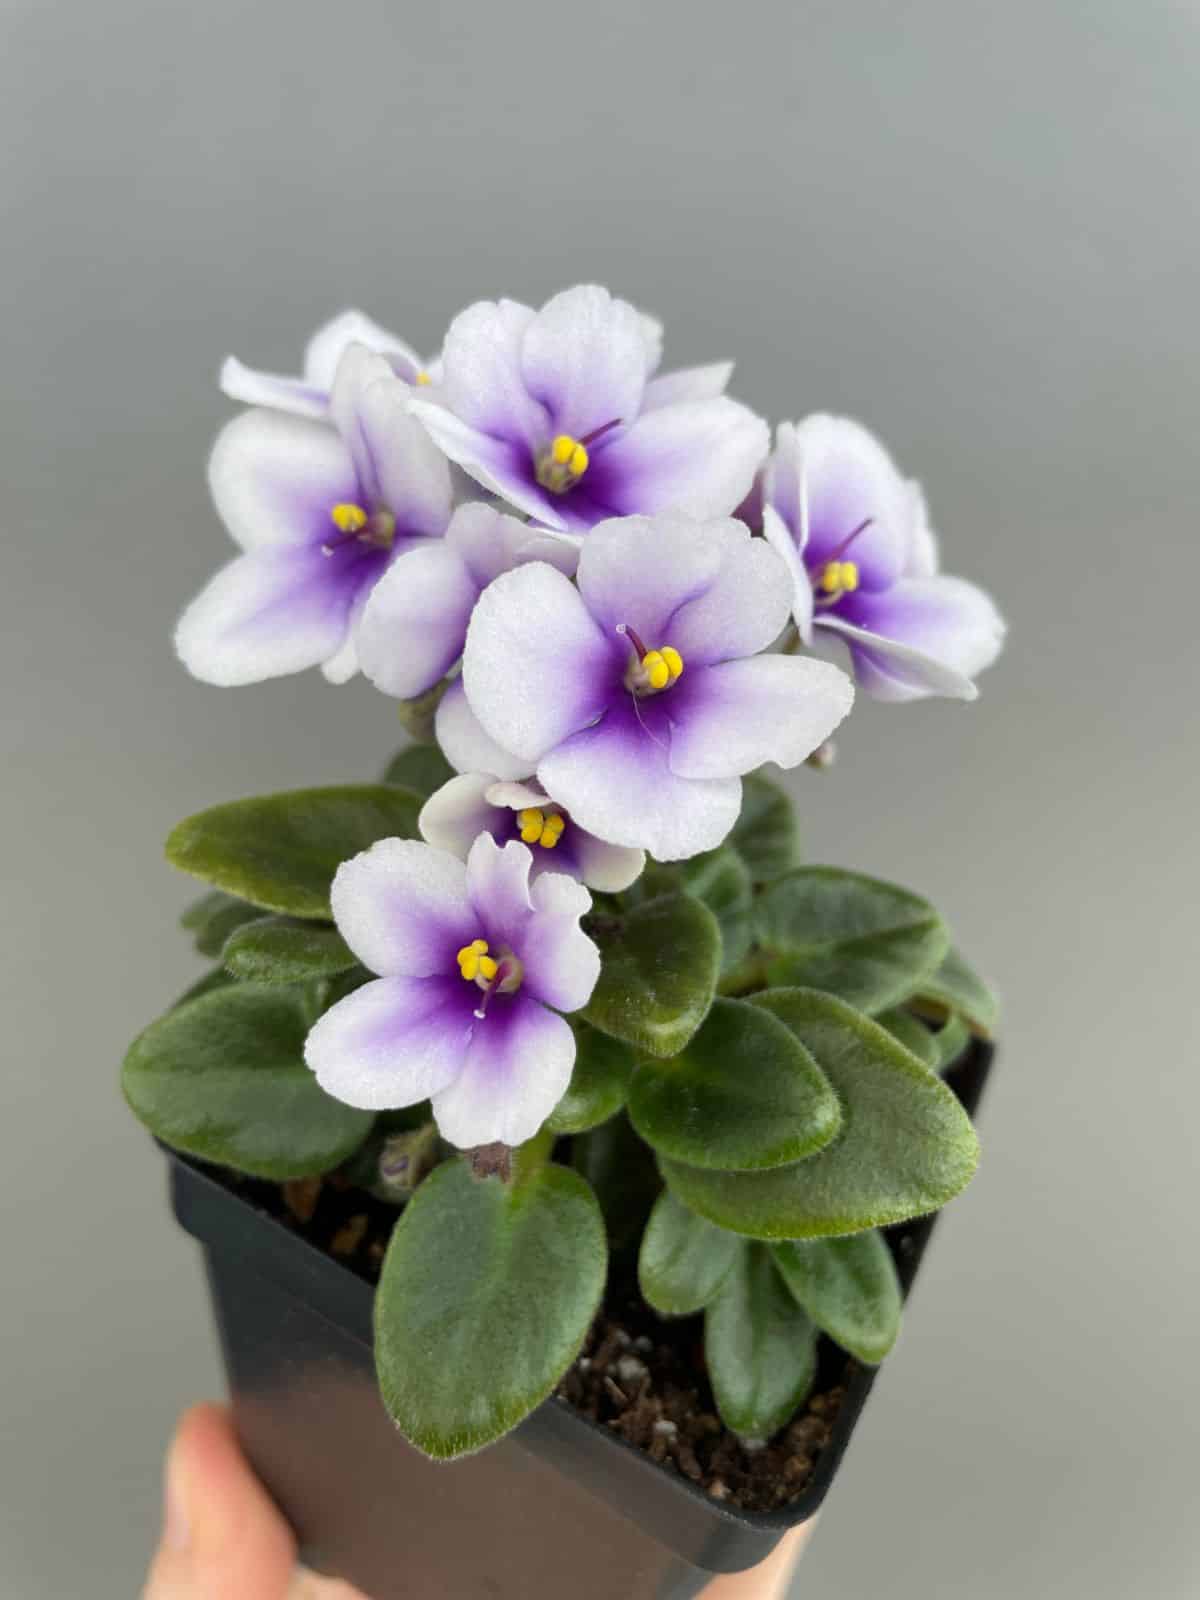 A potted miniature African Violet plant.